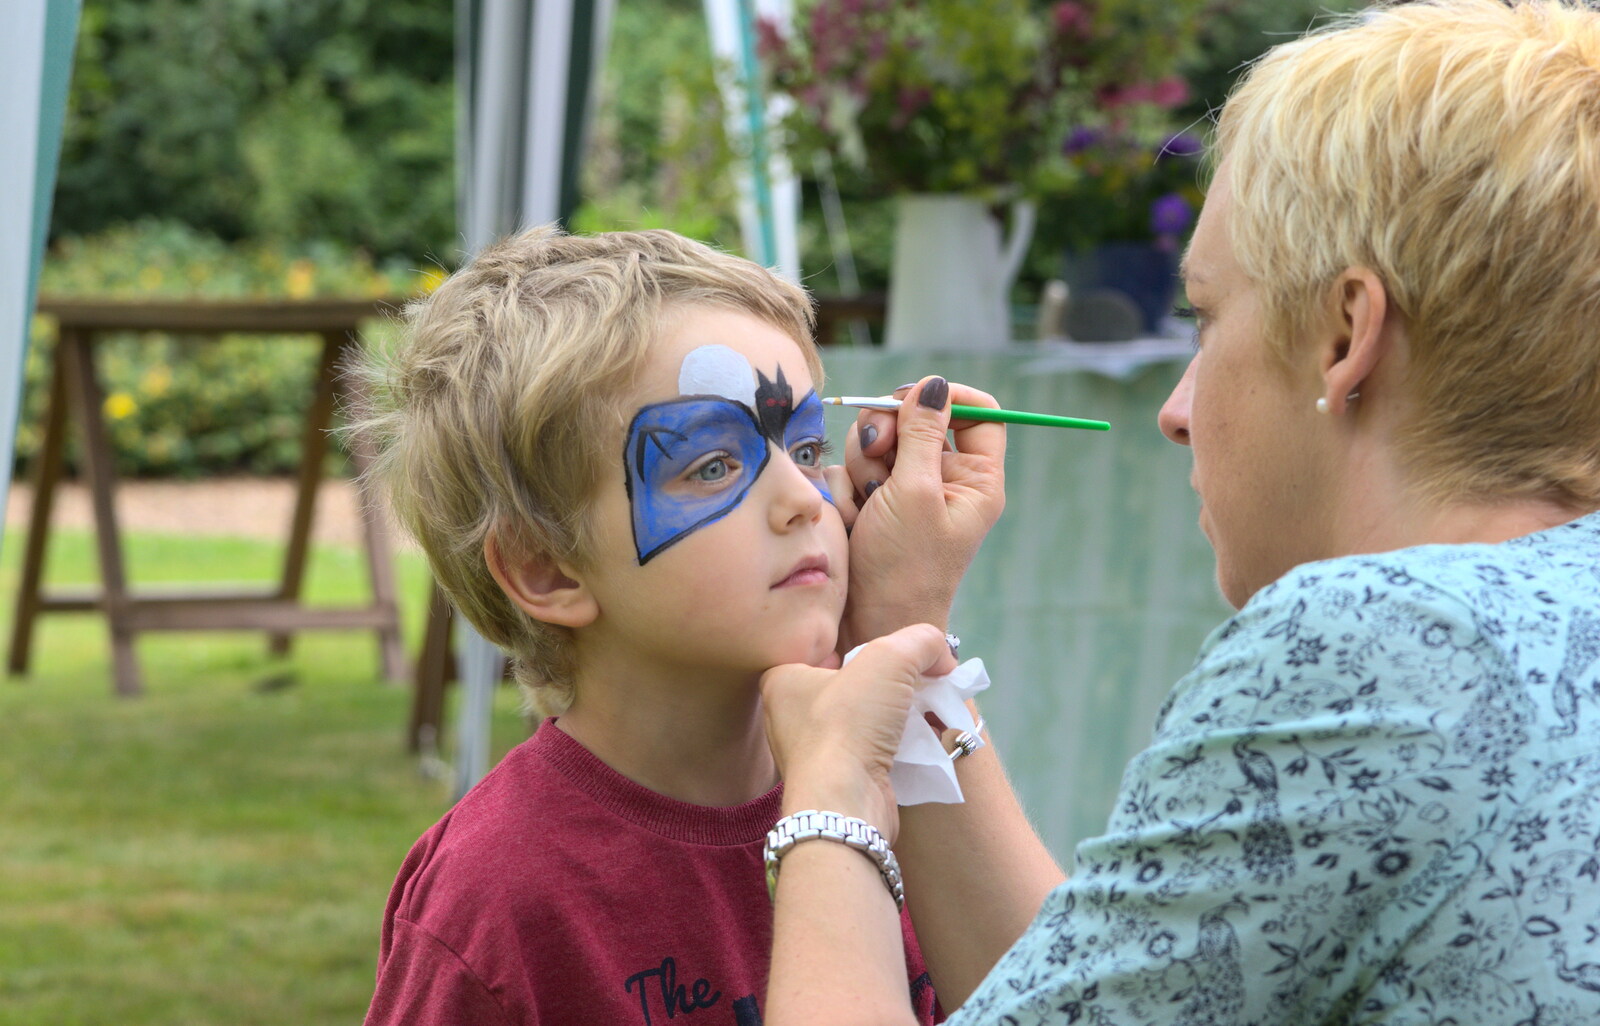 Final touches are applied from The Village Summer Fête, Brome, Suffolk - 5th July 2014